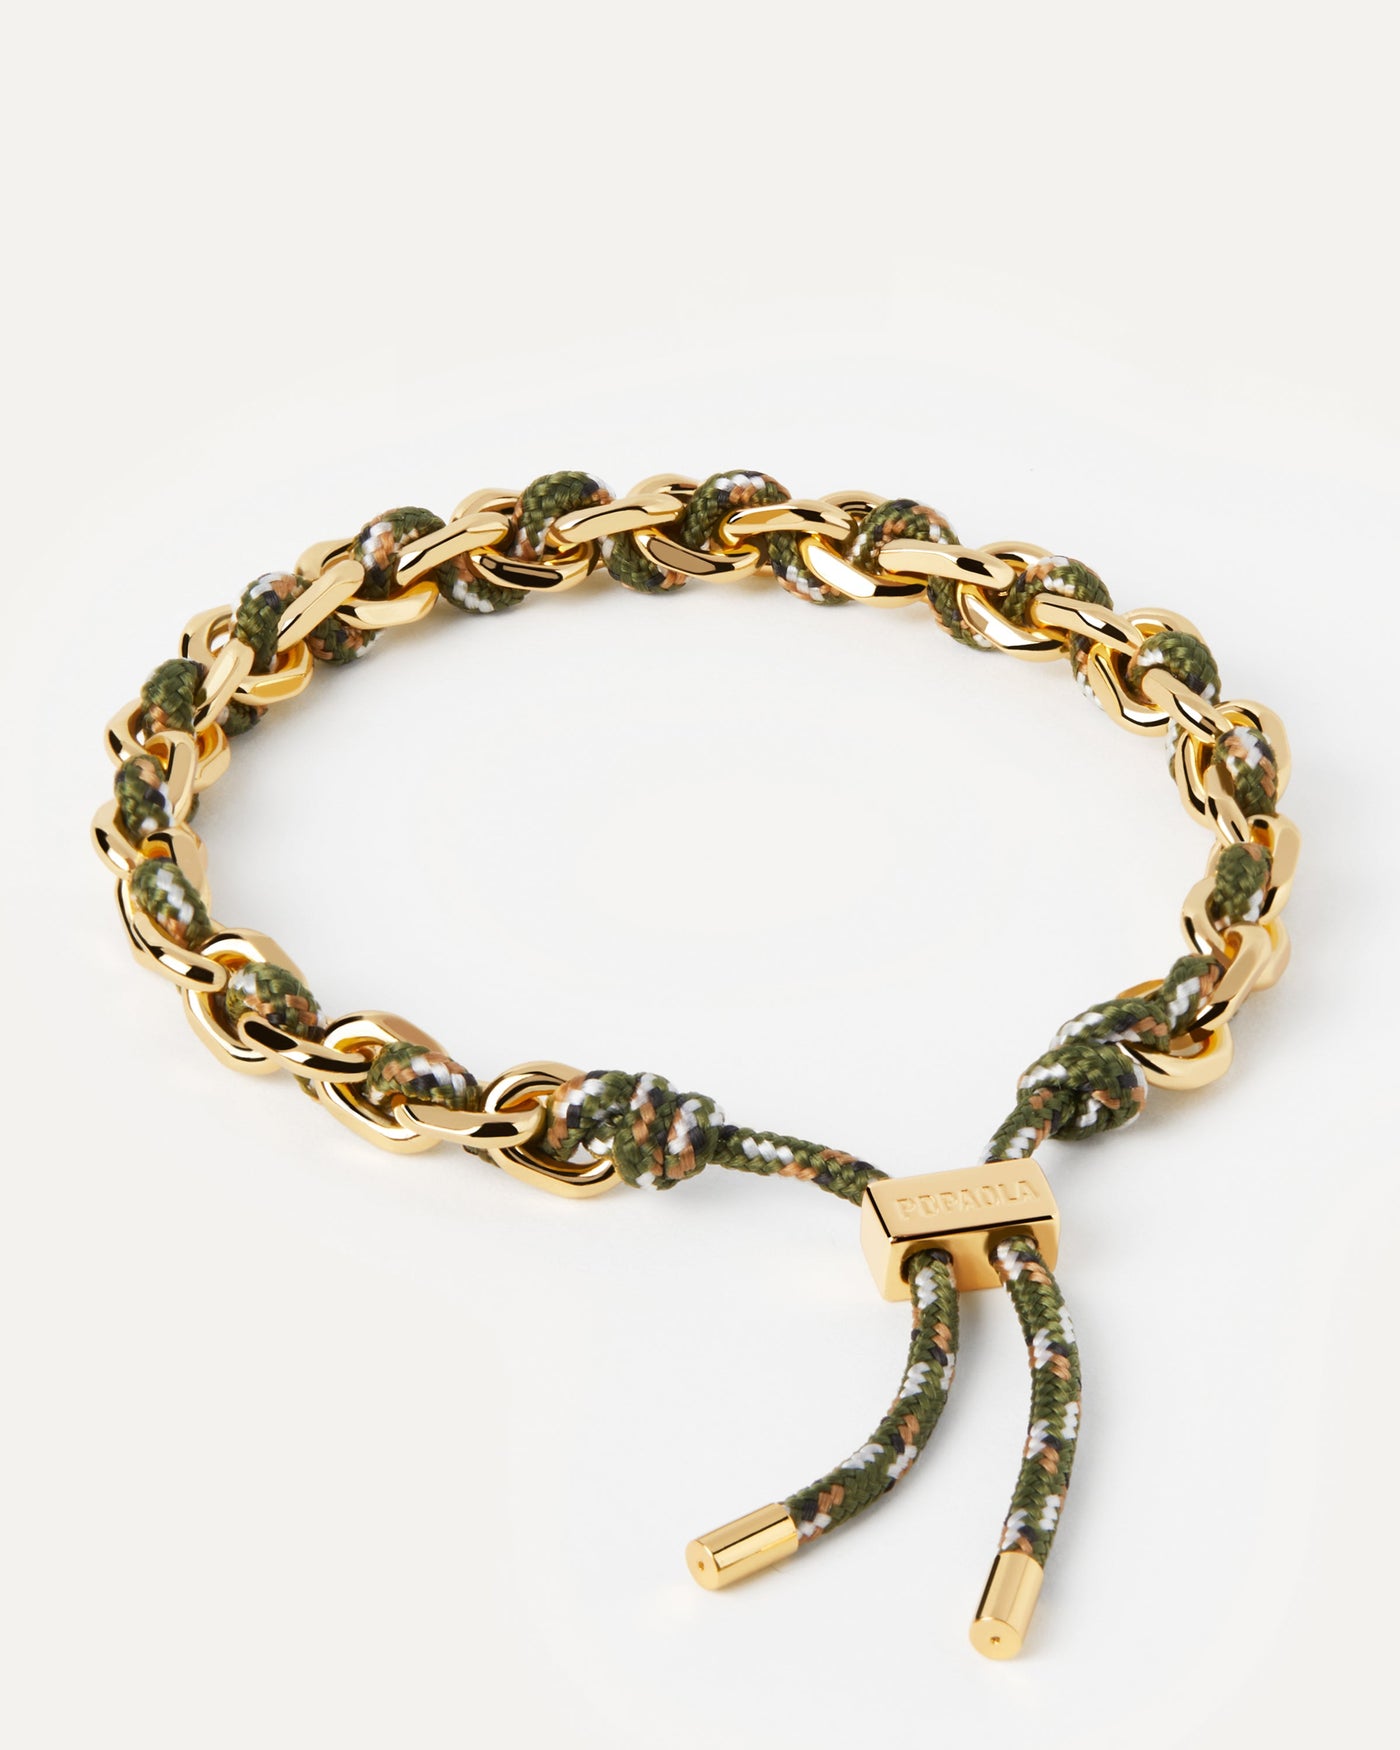 2023 Selection | Cottage Rope and Chain Bracelet. Golden chain bracelet with a forest green rope adjustable sliding clasp. Get the latest arrival from PDPAOLA. Place your order safely and get this Best Seller. Free Shipping.